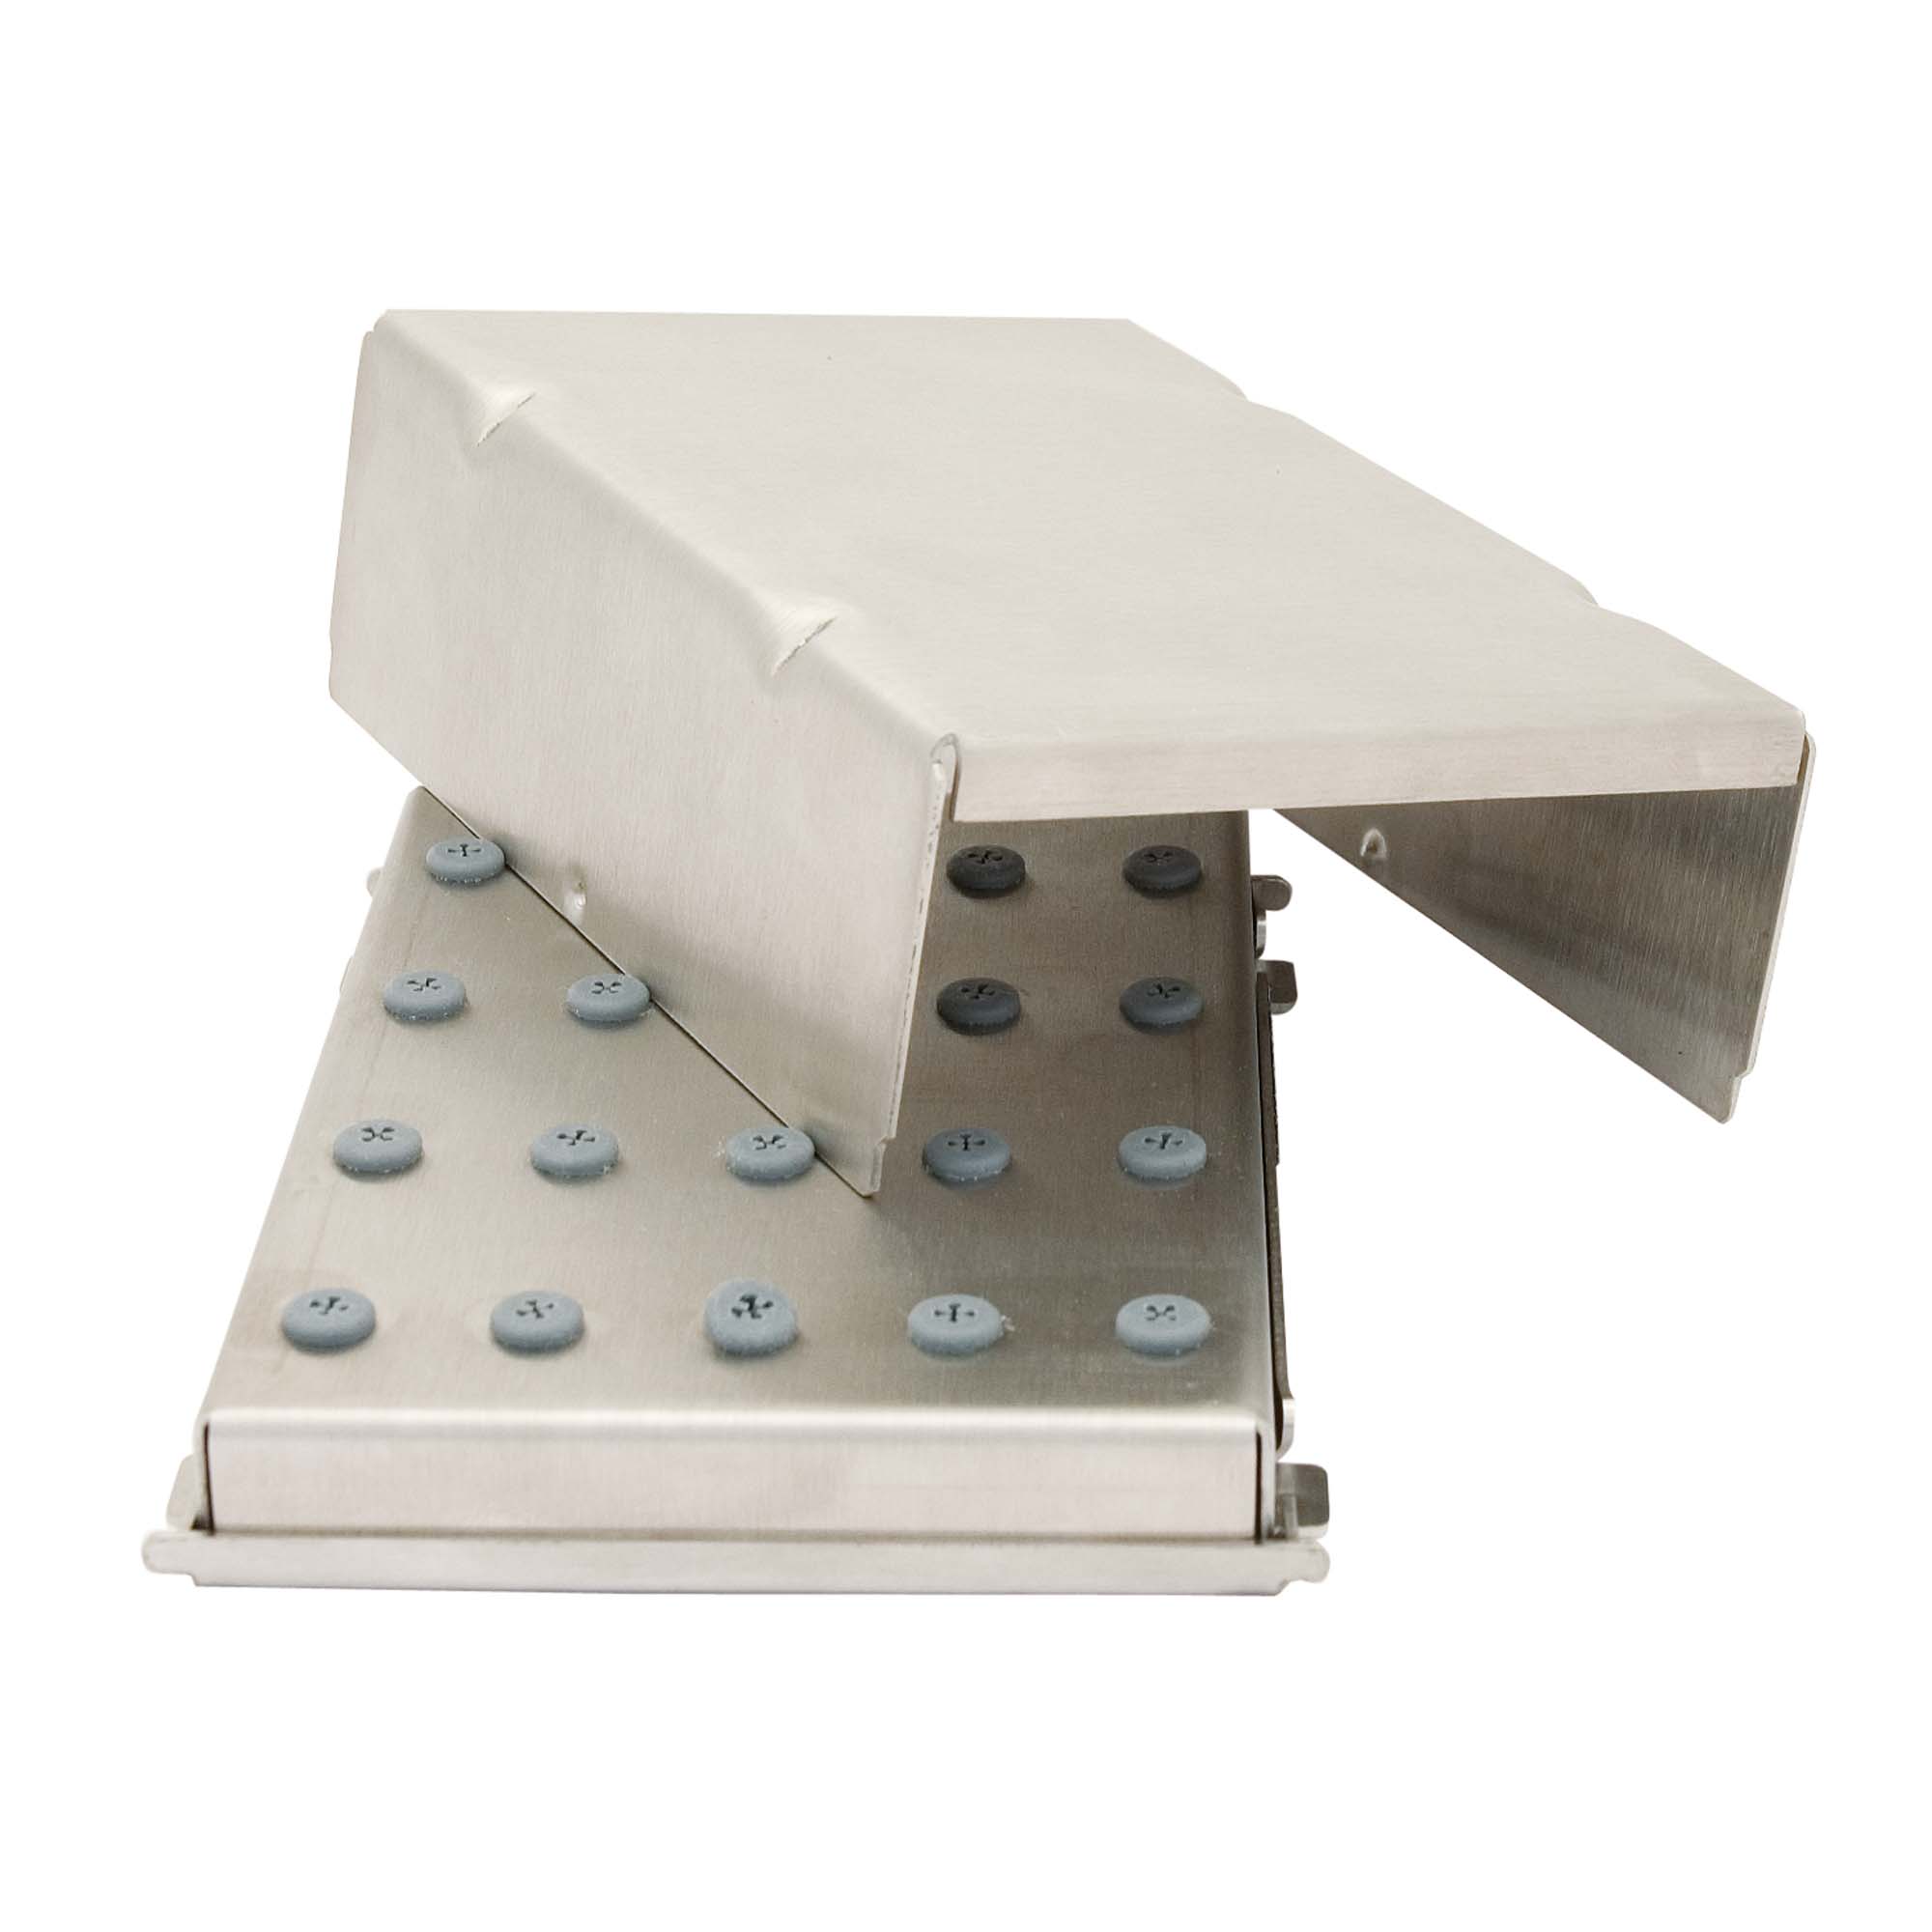 BS140 Bur Block, Stainless Steel with Grommets, 20 RA OR 20 FG, Non-Corrosive, Sterilizable